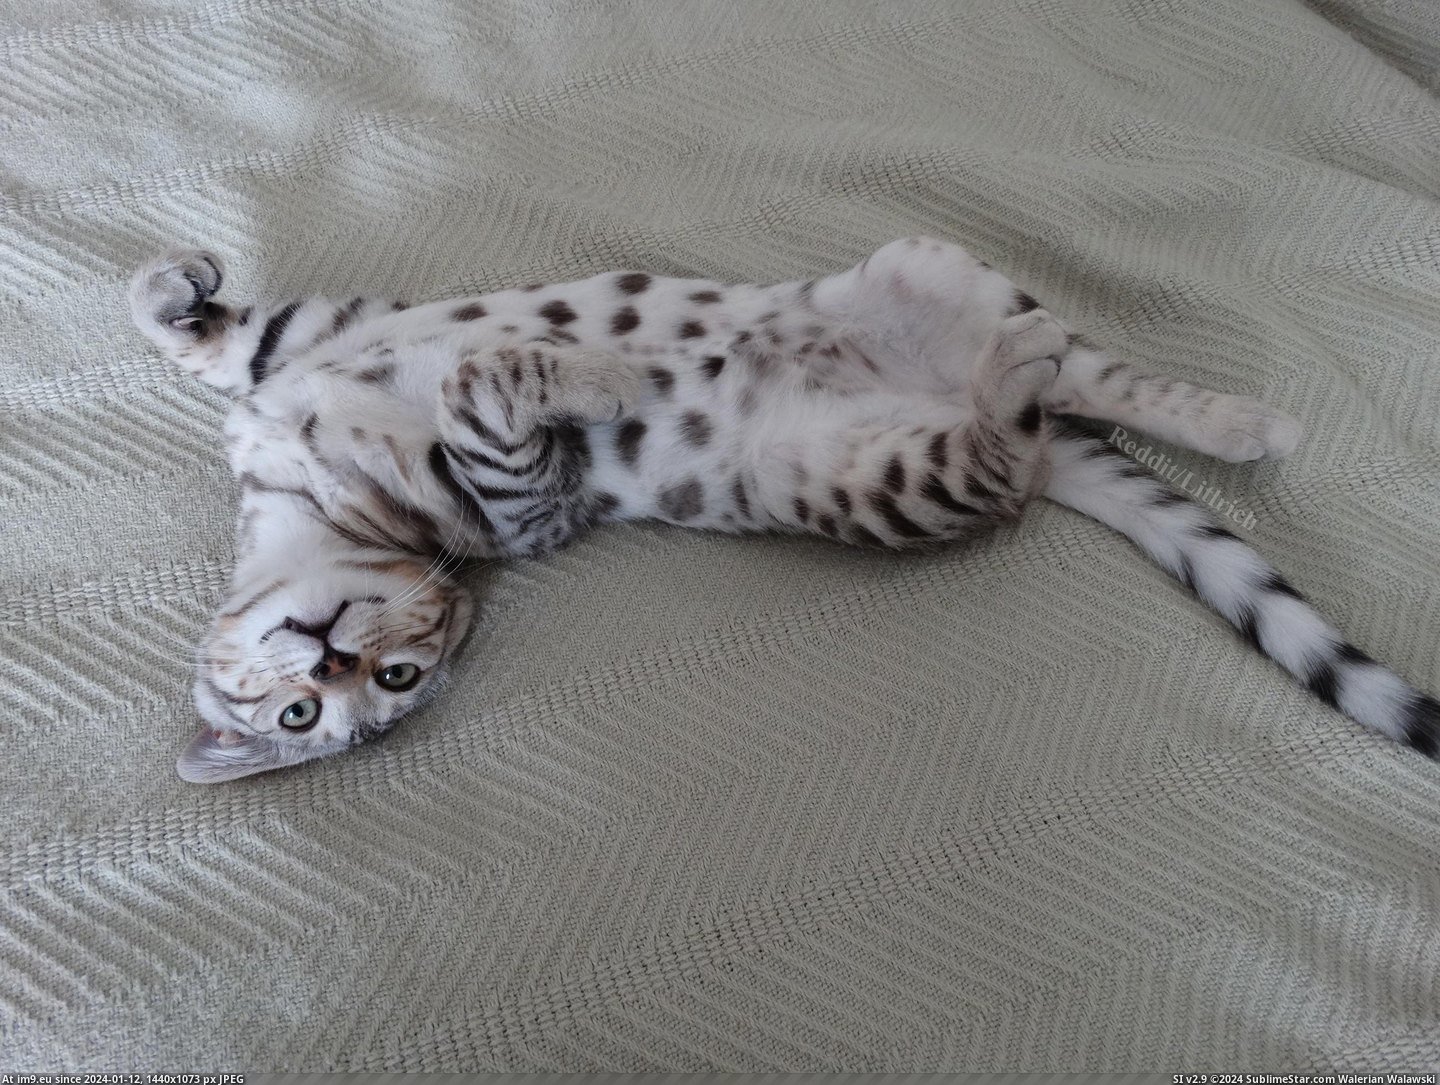 #Time #Kitten #Rub #Decided #Belly [Aww] I just got home to see my kitten has already decided it's time for a belly rub Pic. (Bild von album My r/AWW favs))